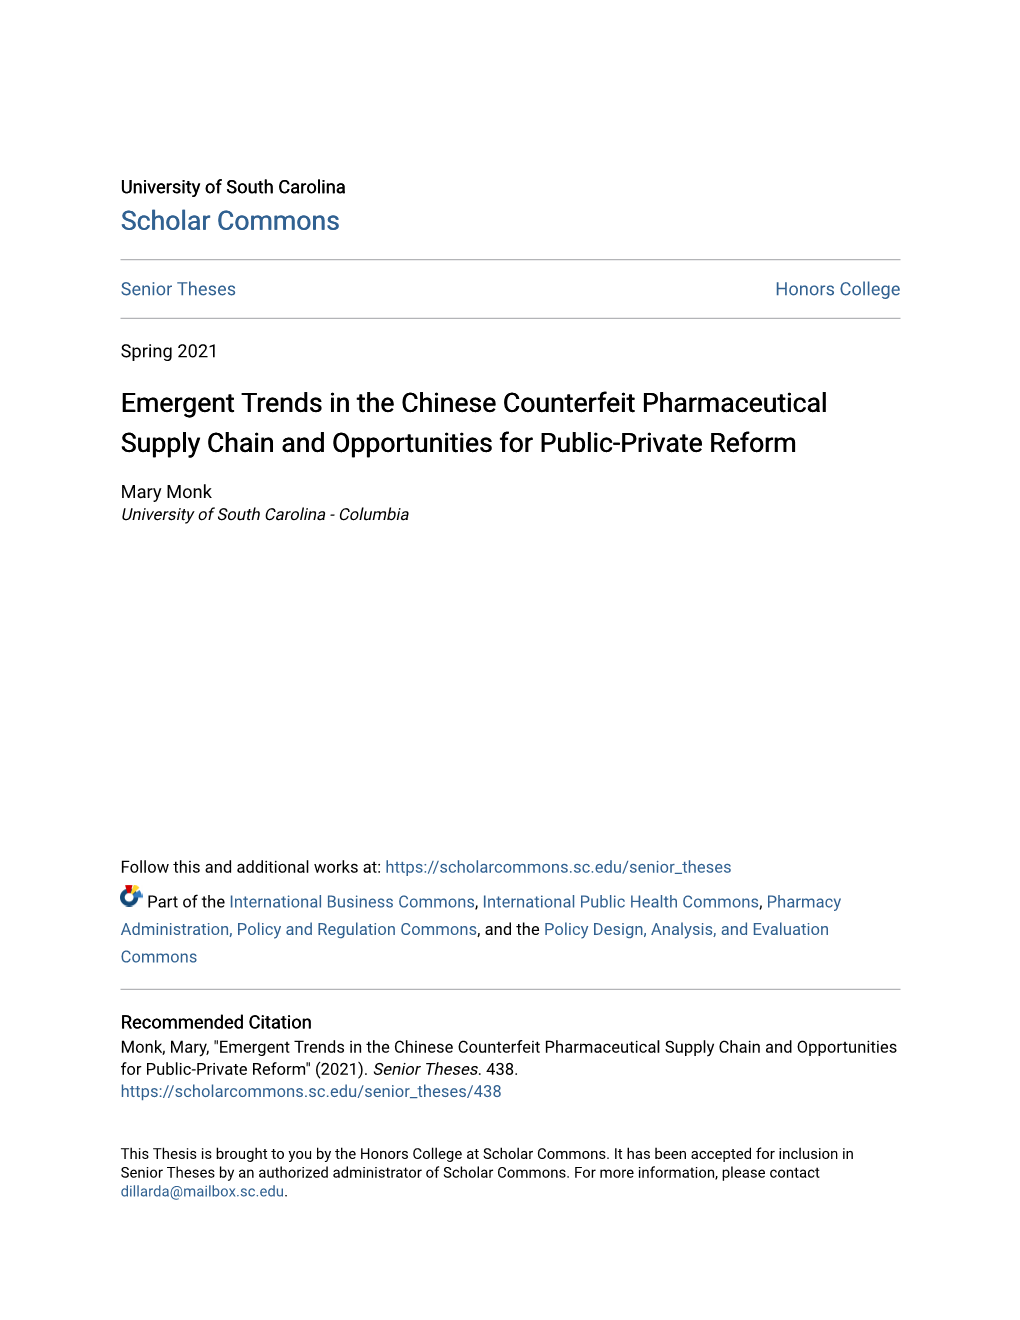 Emergent Trends in the Chinese Counterfeit Pharmaceutical Supply Chain and Opportunities for Public-Private Reform